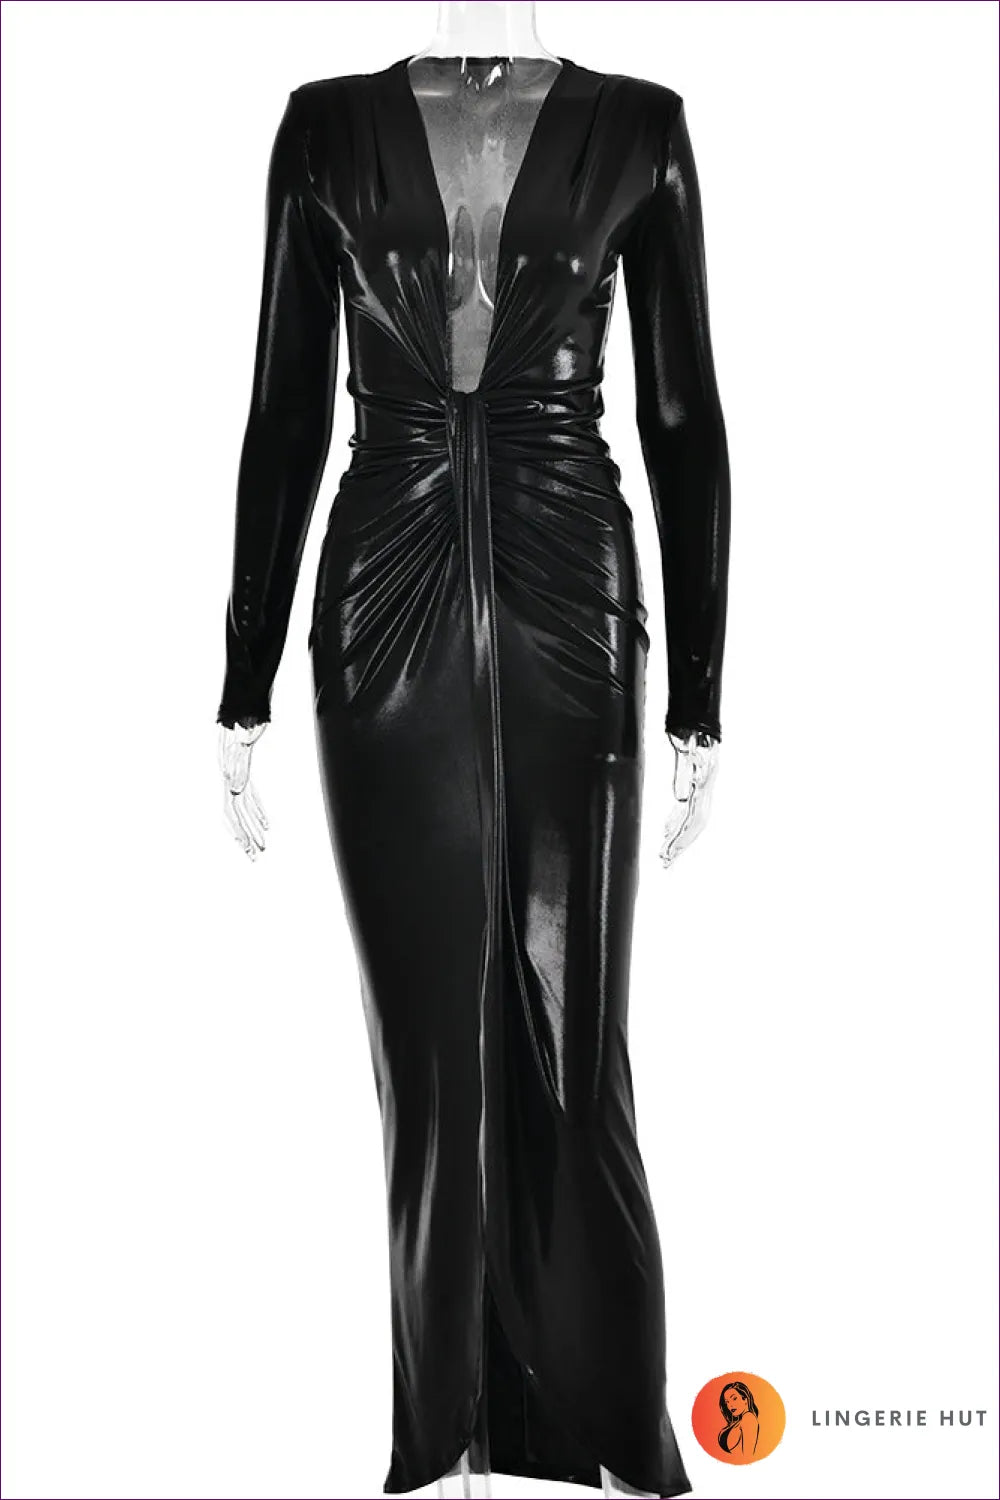 Embrace The Essence Of Glamour With Lingerie Hut’s Metallic Coated Fabric Dress. Its Sexy, Glossy Finish